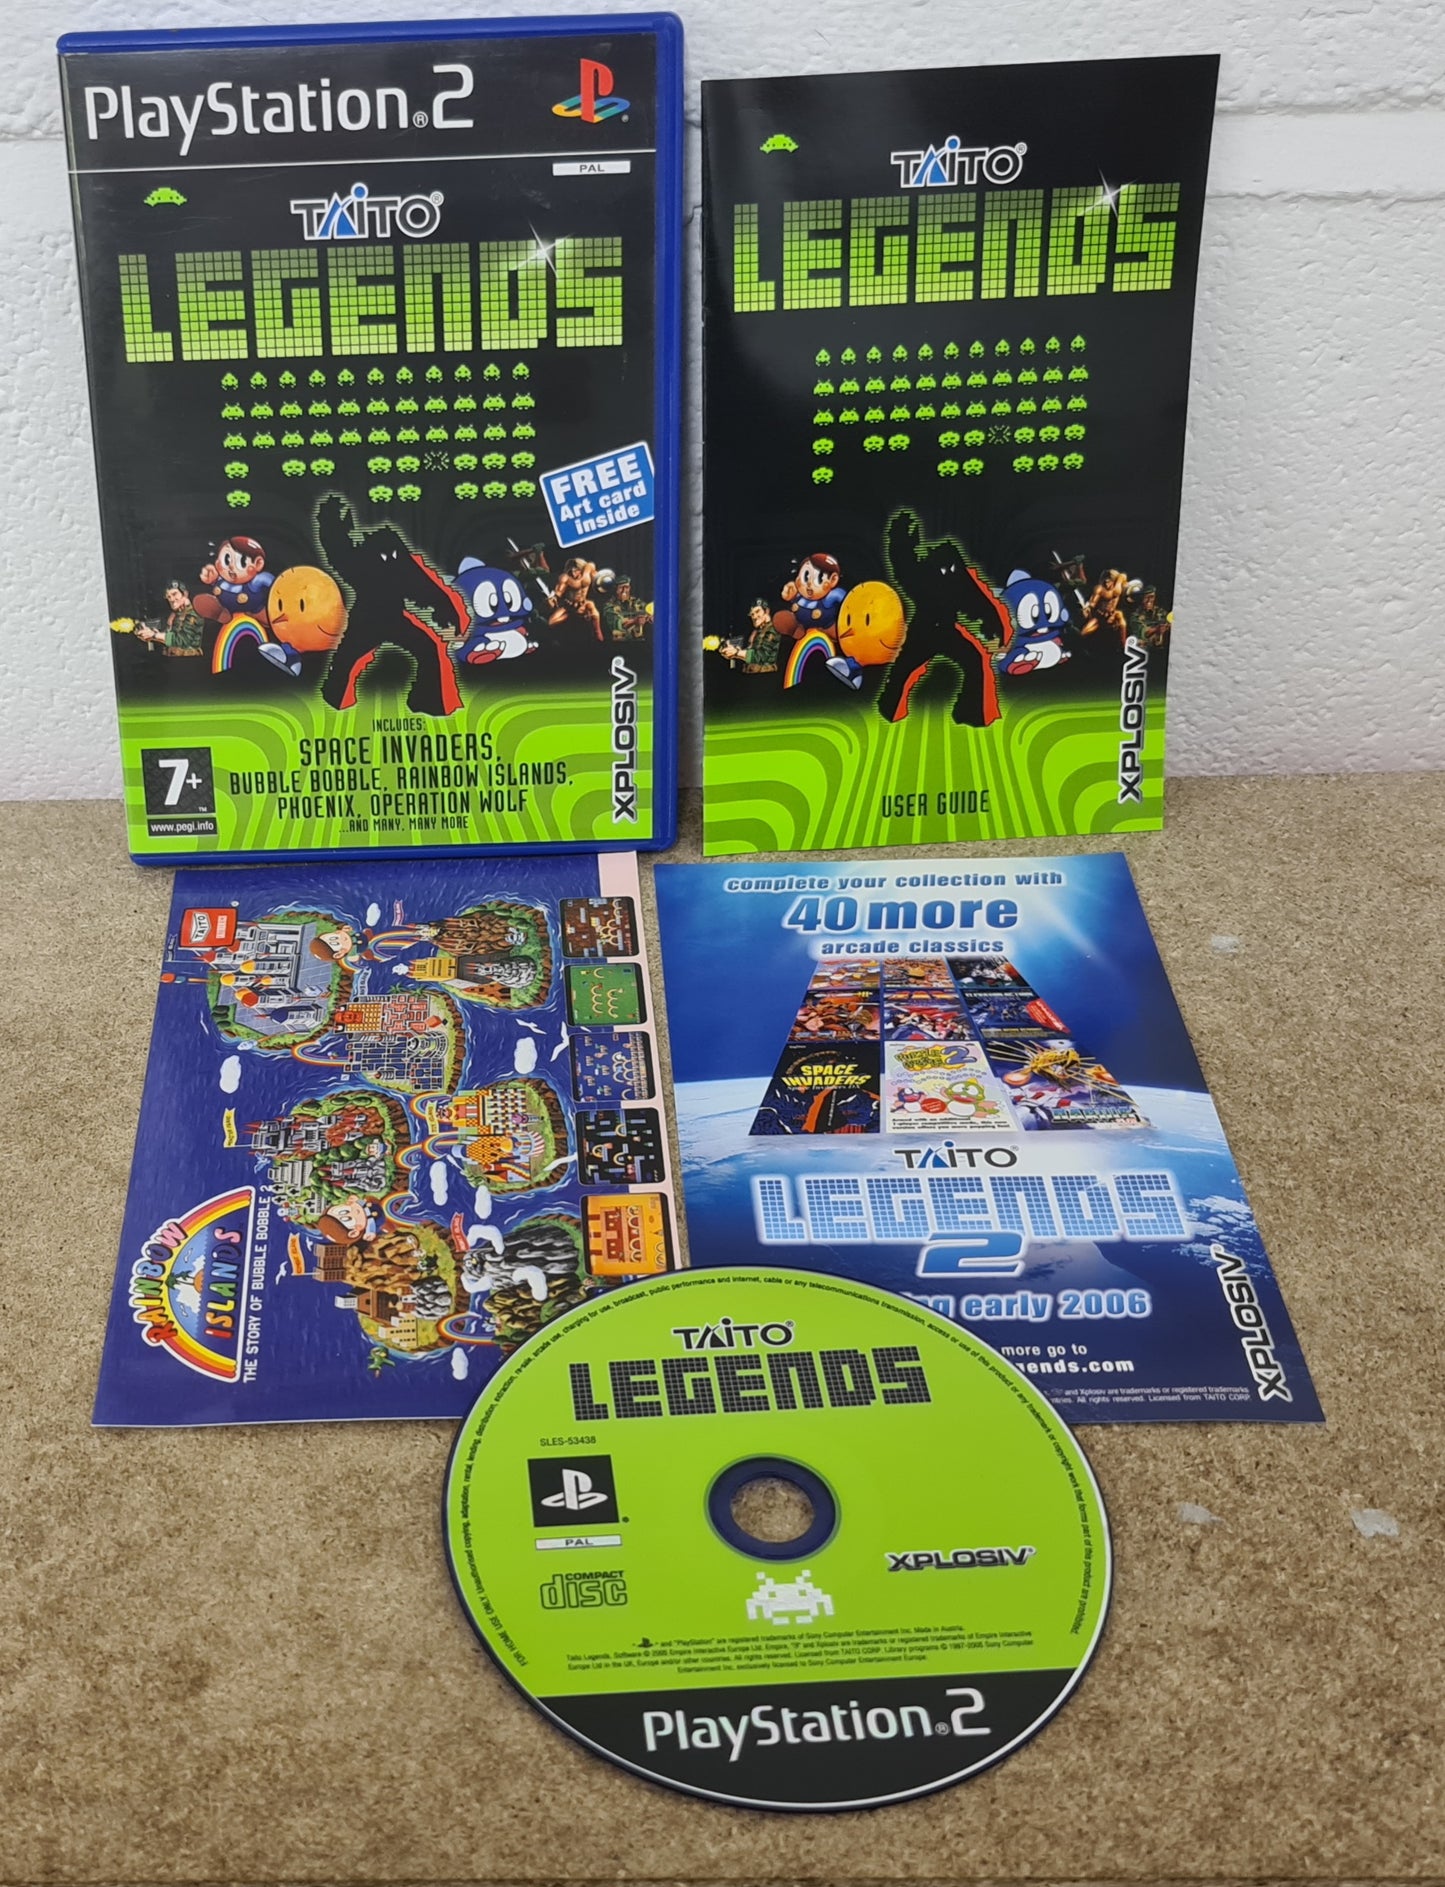 Taito Legends with Art Card Sony Playstation 2 (PS2) Game